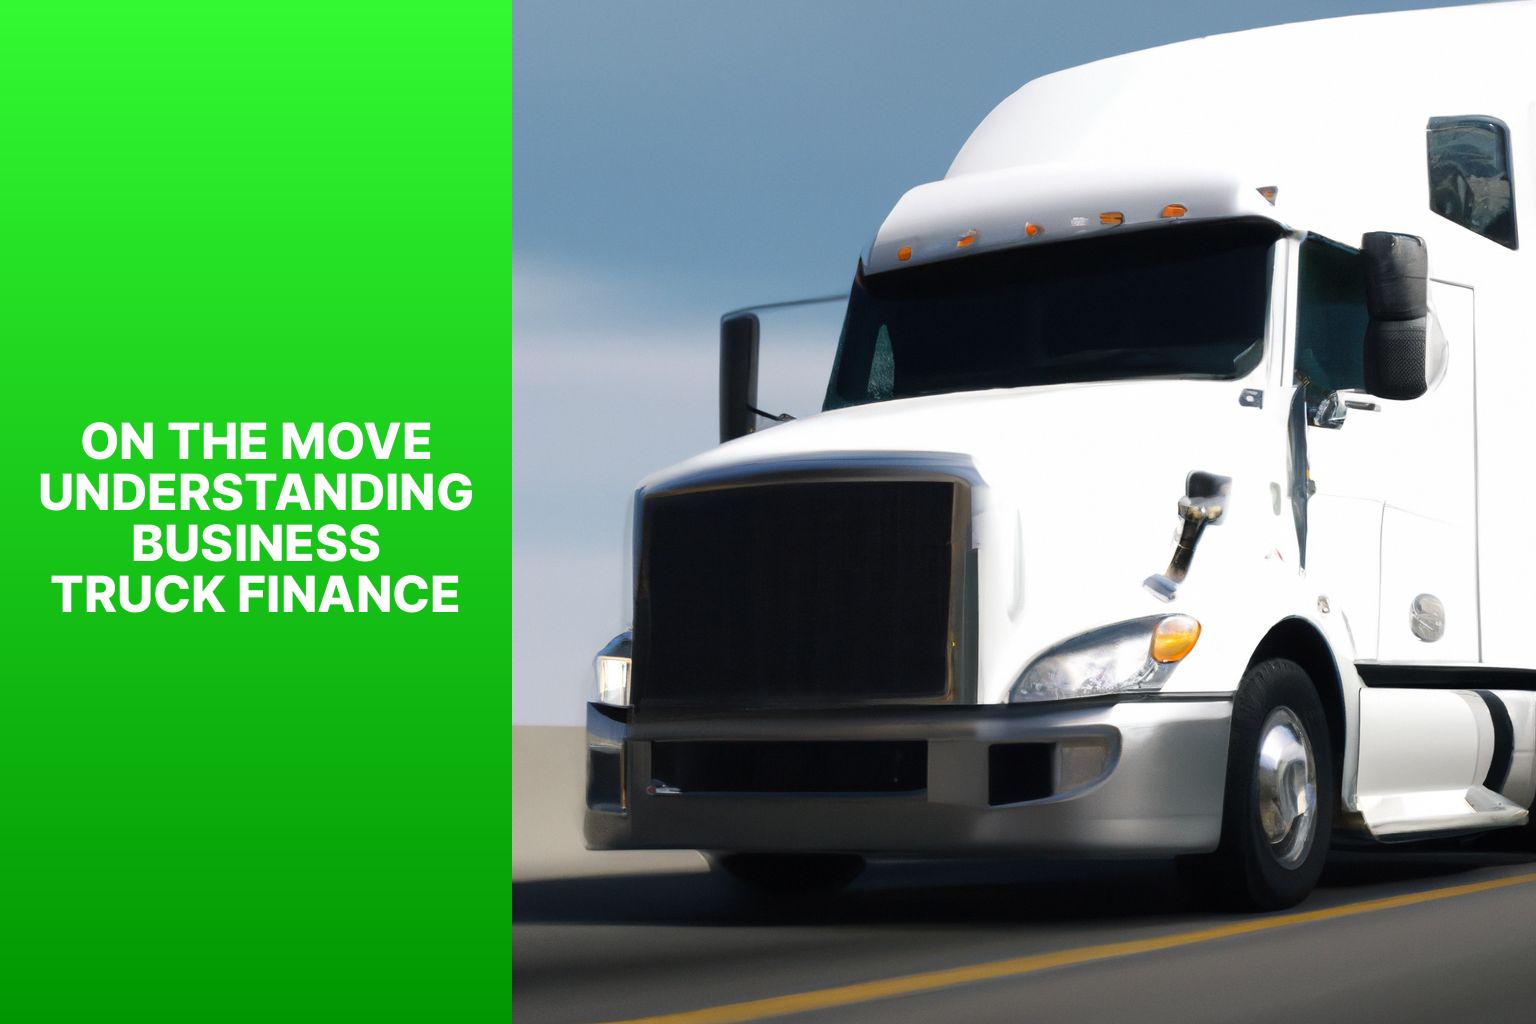 On the Move Understanding Business Truck Finance